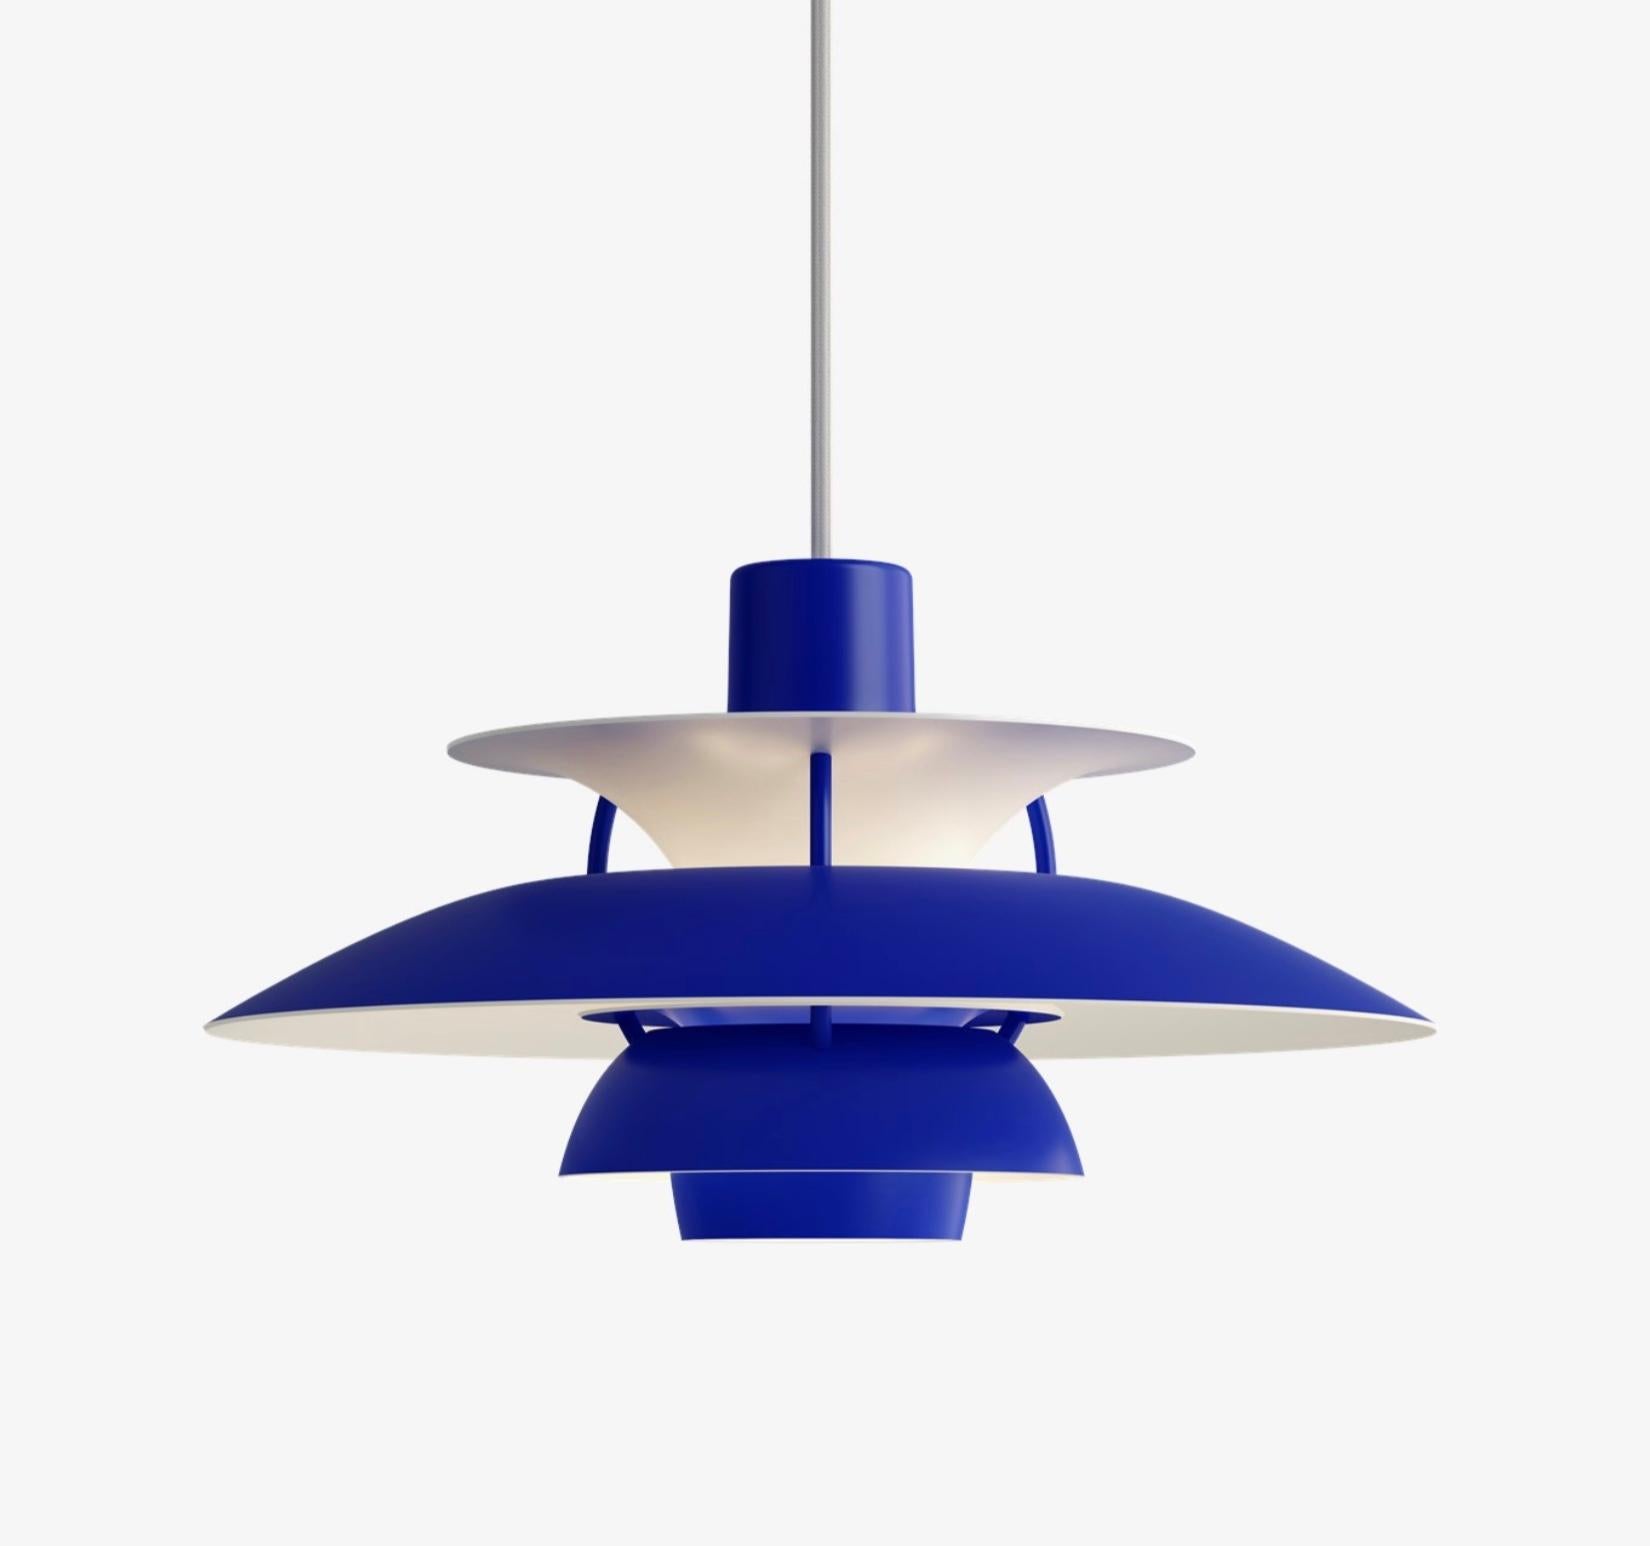 Poul Henningsen PH5 Mini pendant for Louis Poulsen. Designed 1958, Mini in 2017. New, current production.

Poul Henningsen developed the PH 5 in 1958 in response to constant changes made to the shape and Size of incandescent bulbs by bulb